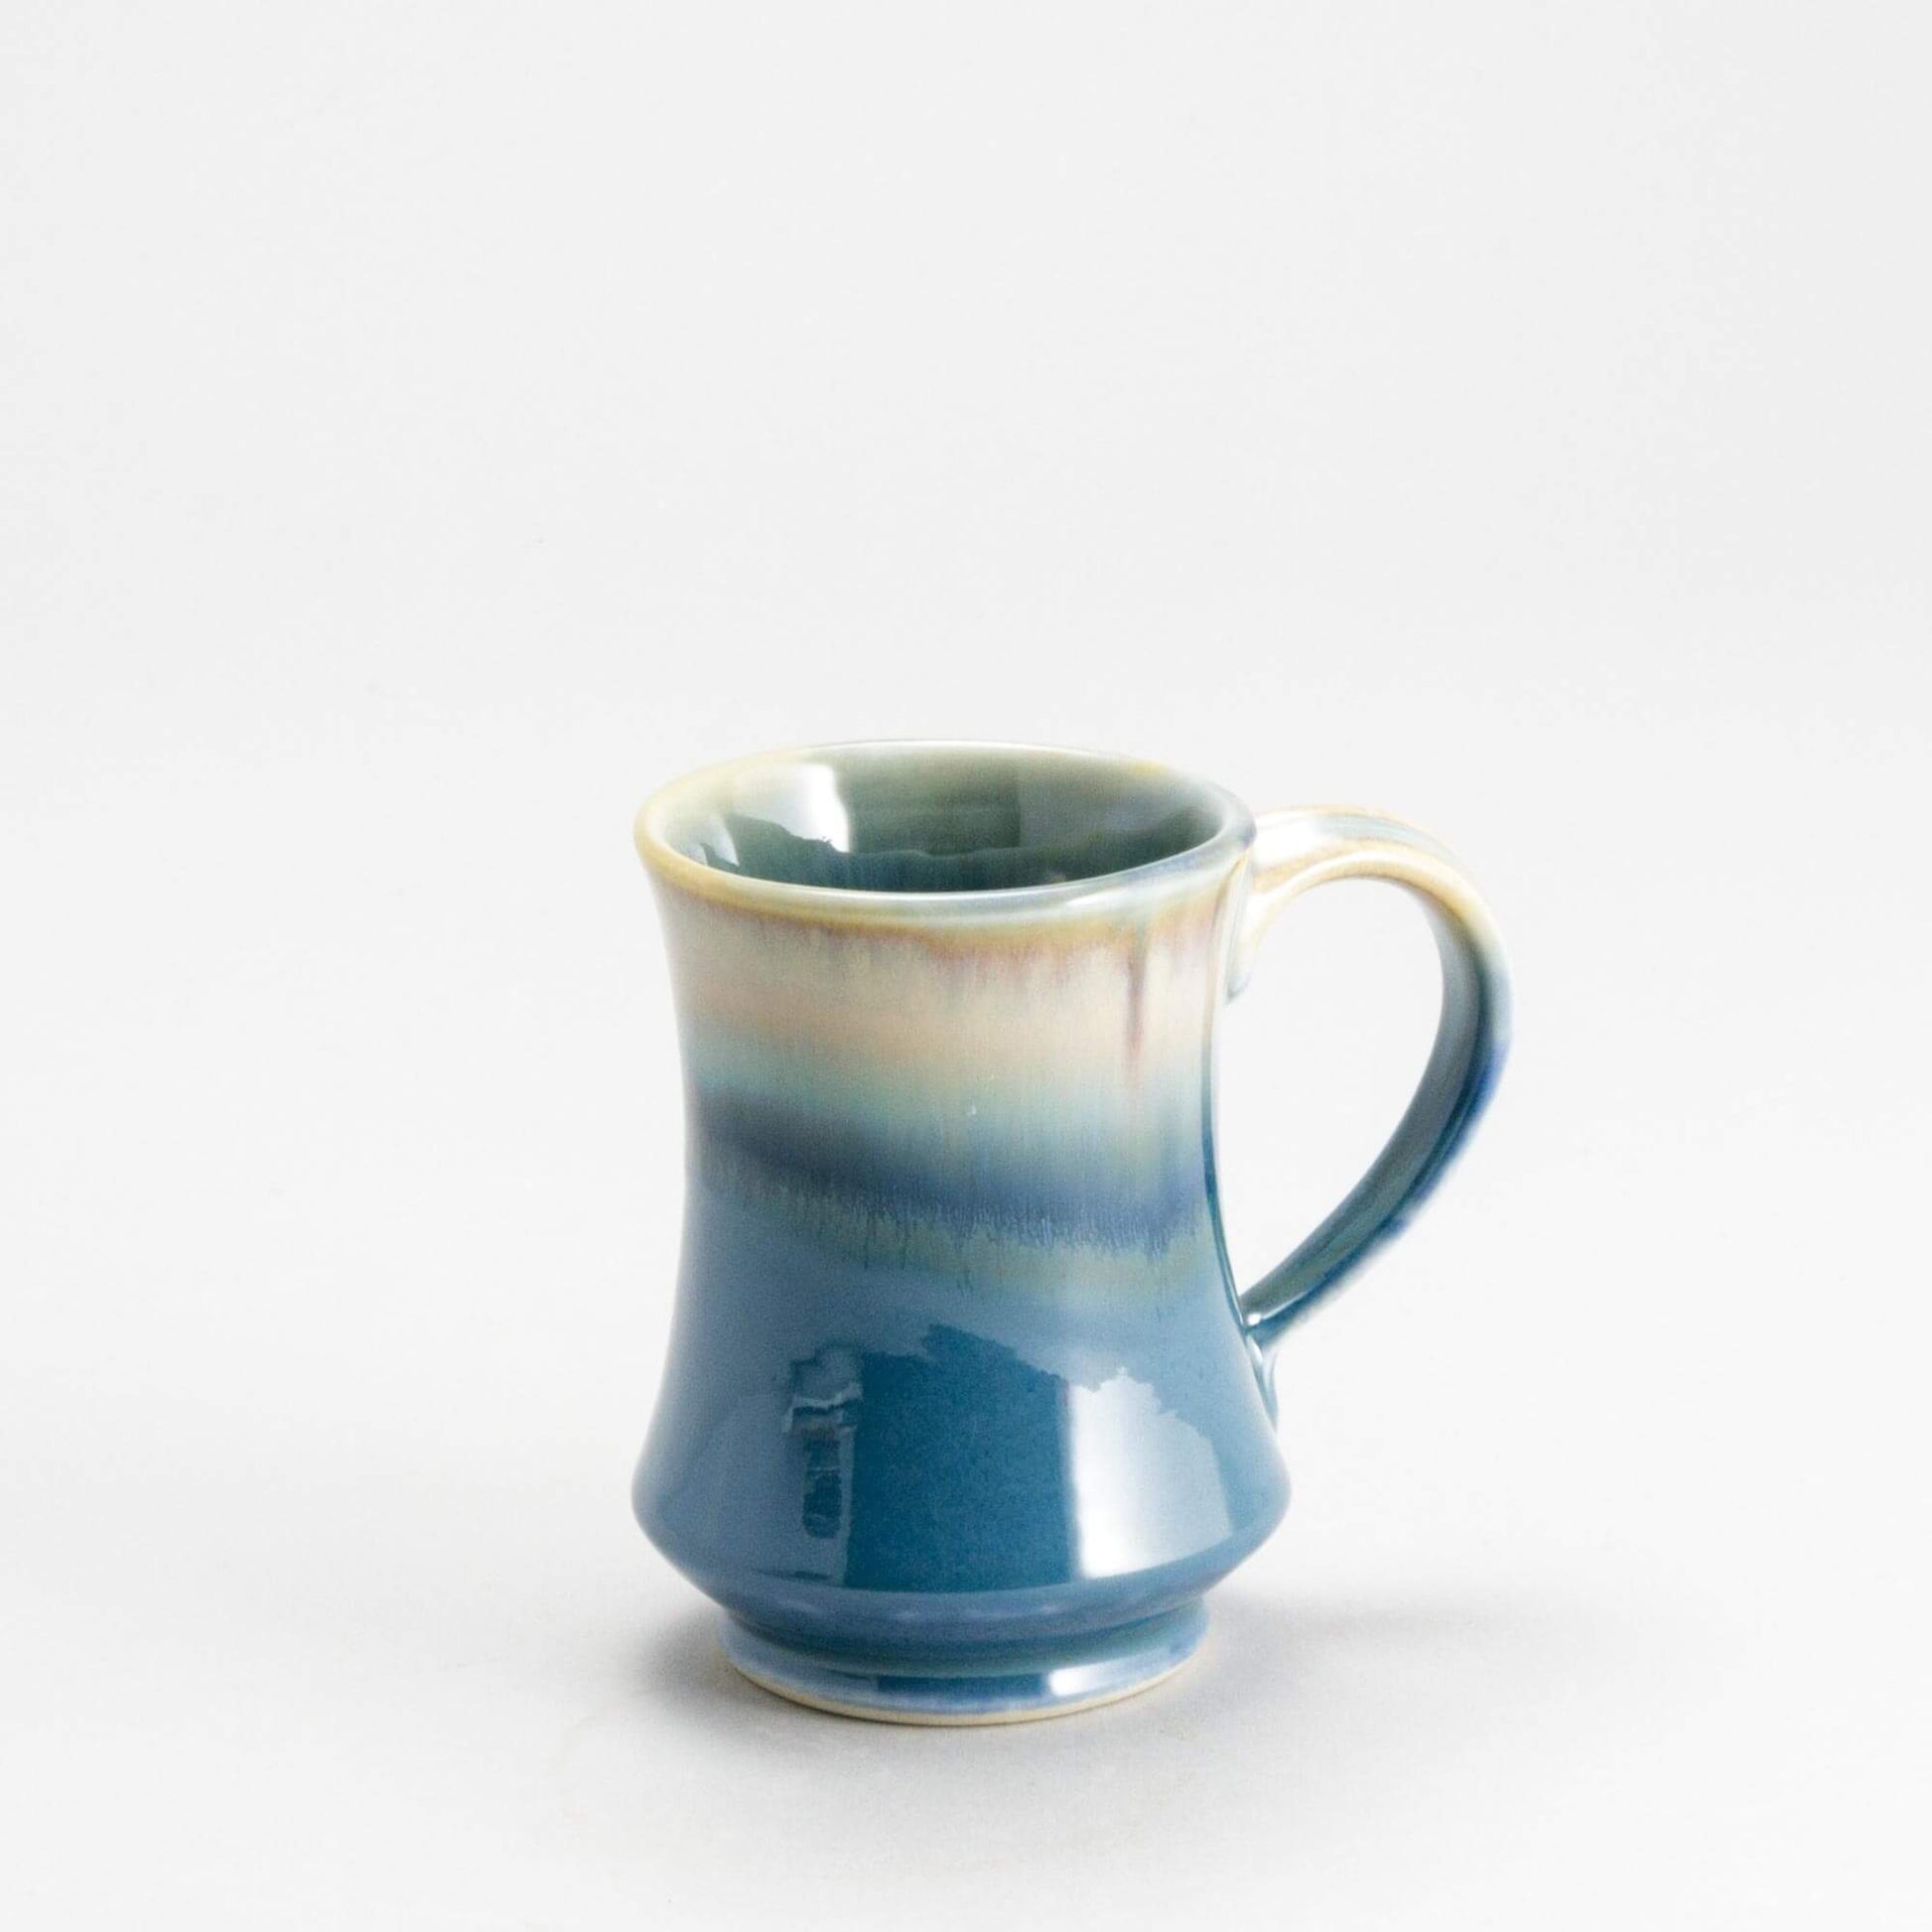 Handmade Pottery Pedestal Mug made by Georgetown Pottery in Maine Blue Oribe